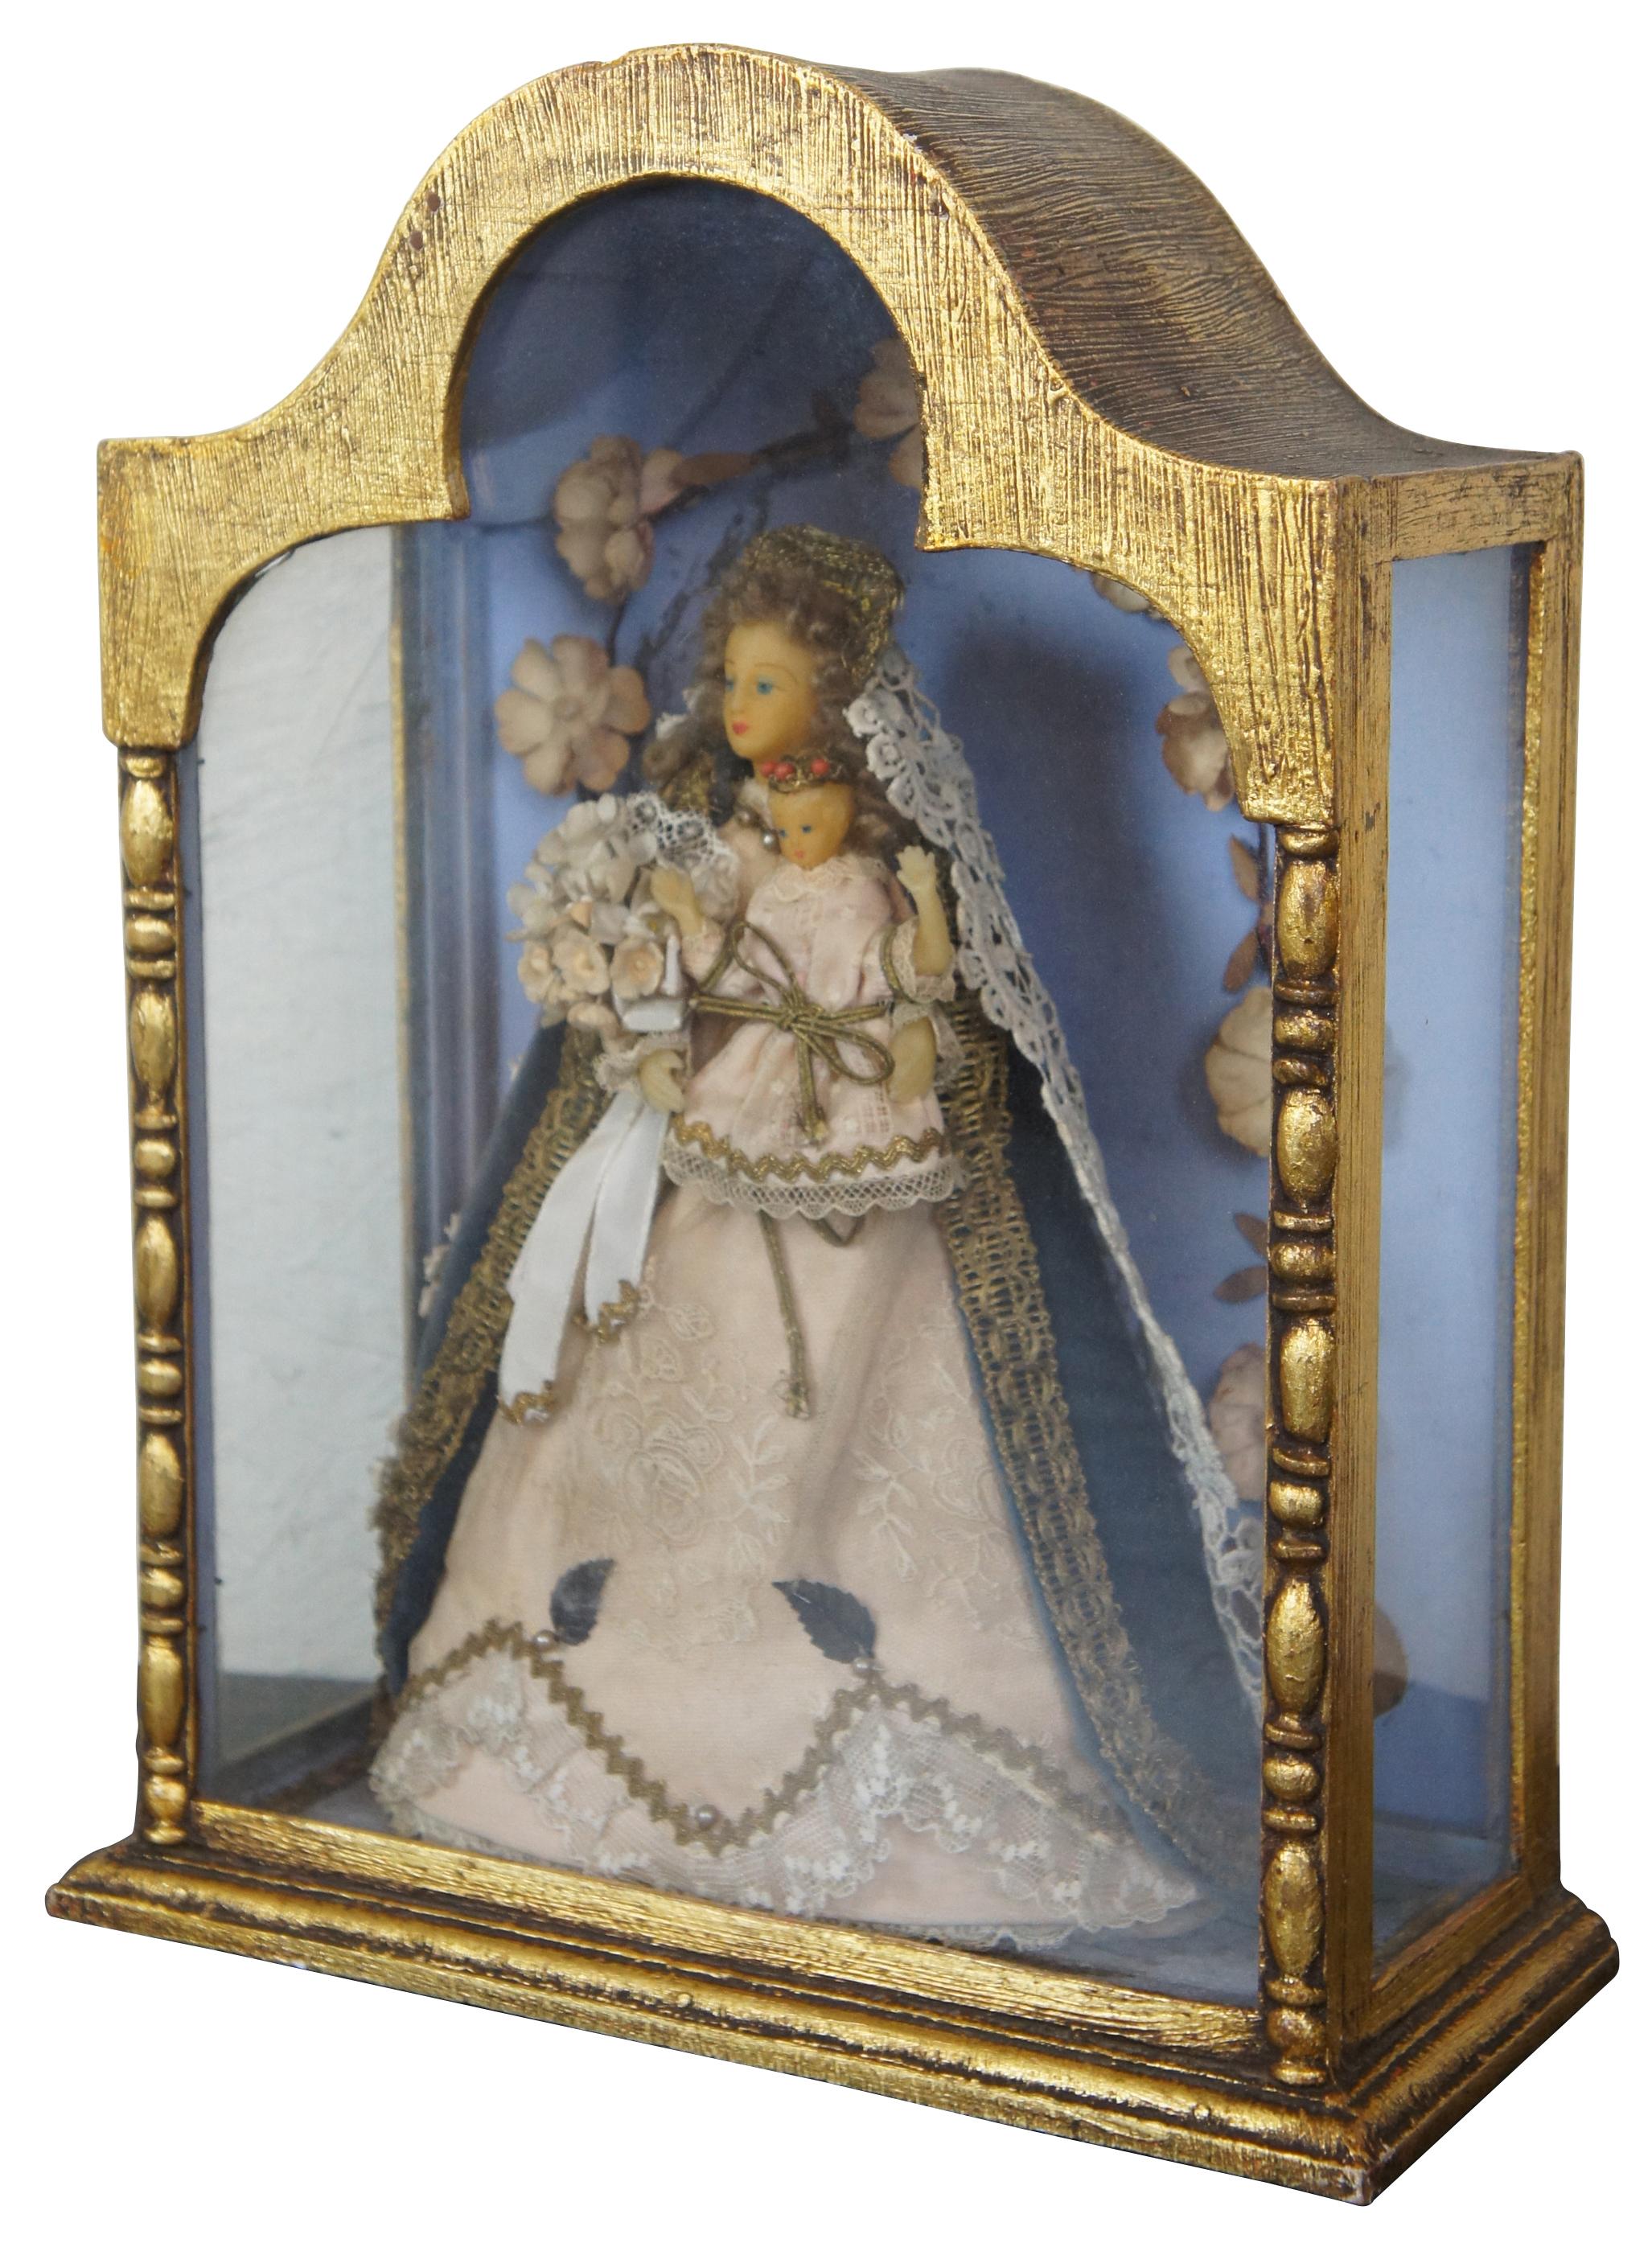 Vintage gilded tabletop display curio shrine case containing the figure of the Virgin Mary dressed as the Queen of Heaven, holding a bouquet of flowers and the Baby Jesus, surrounded by an arch of flowers.
        